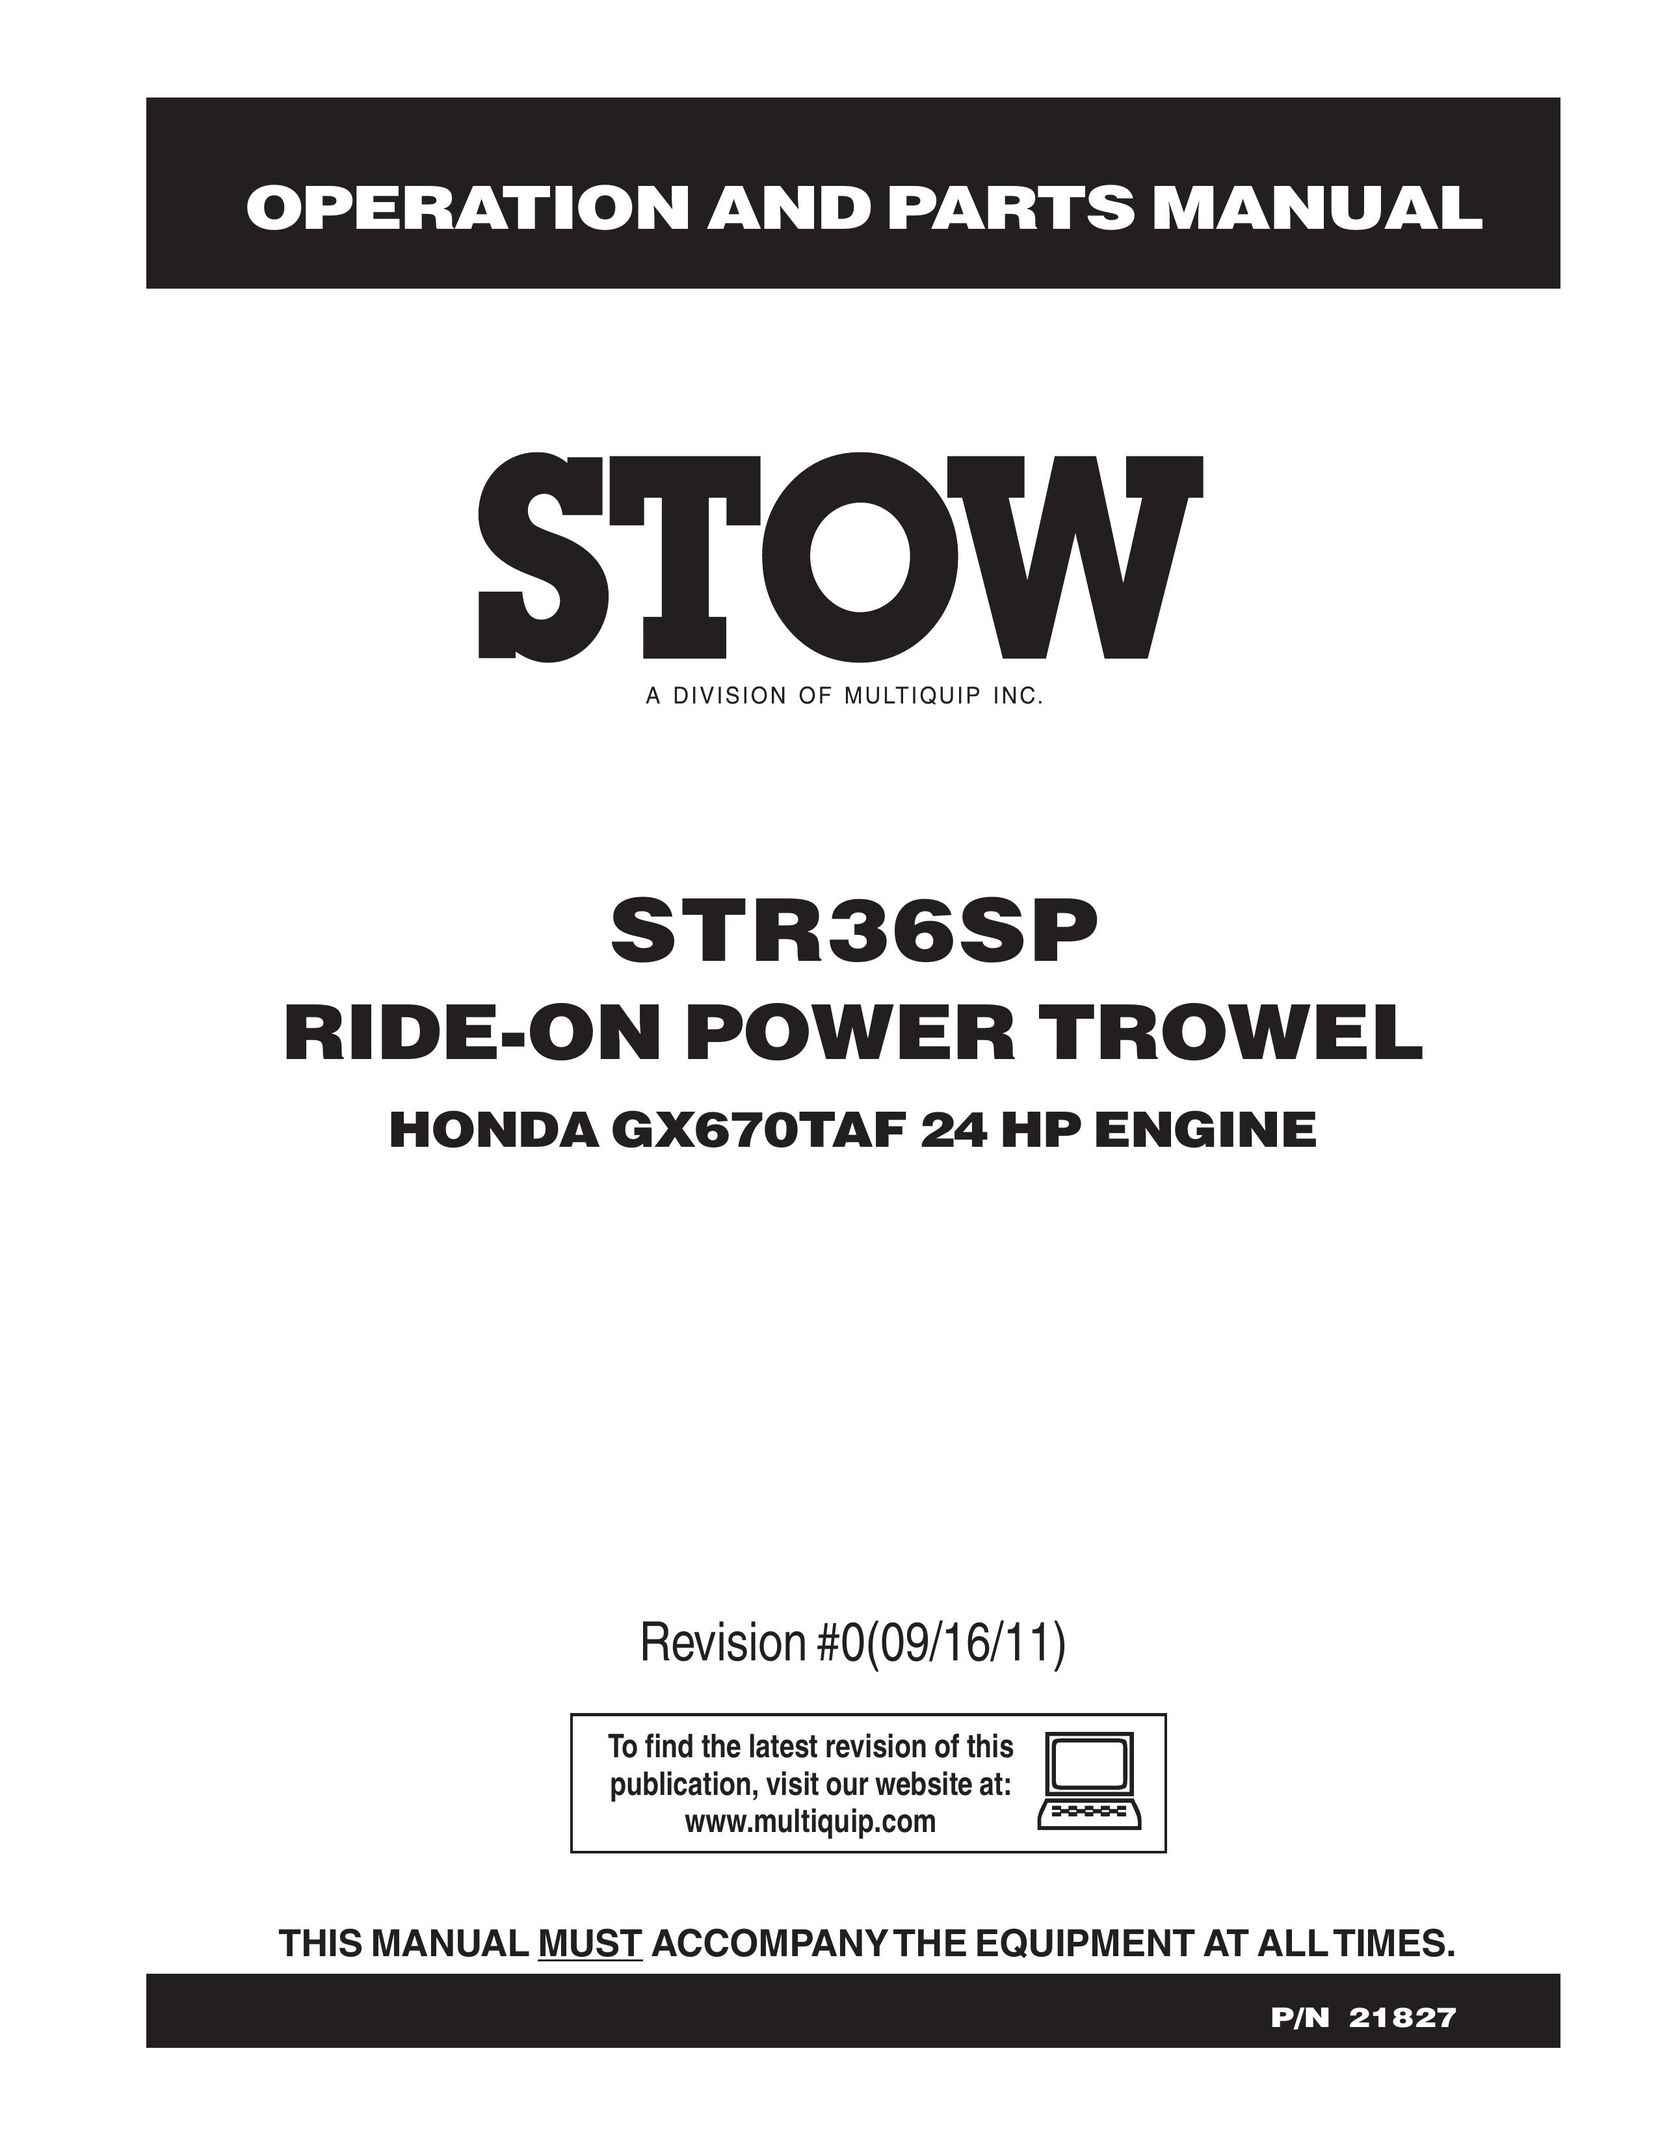 Stow STR36SP Model Vehicle User Manual